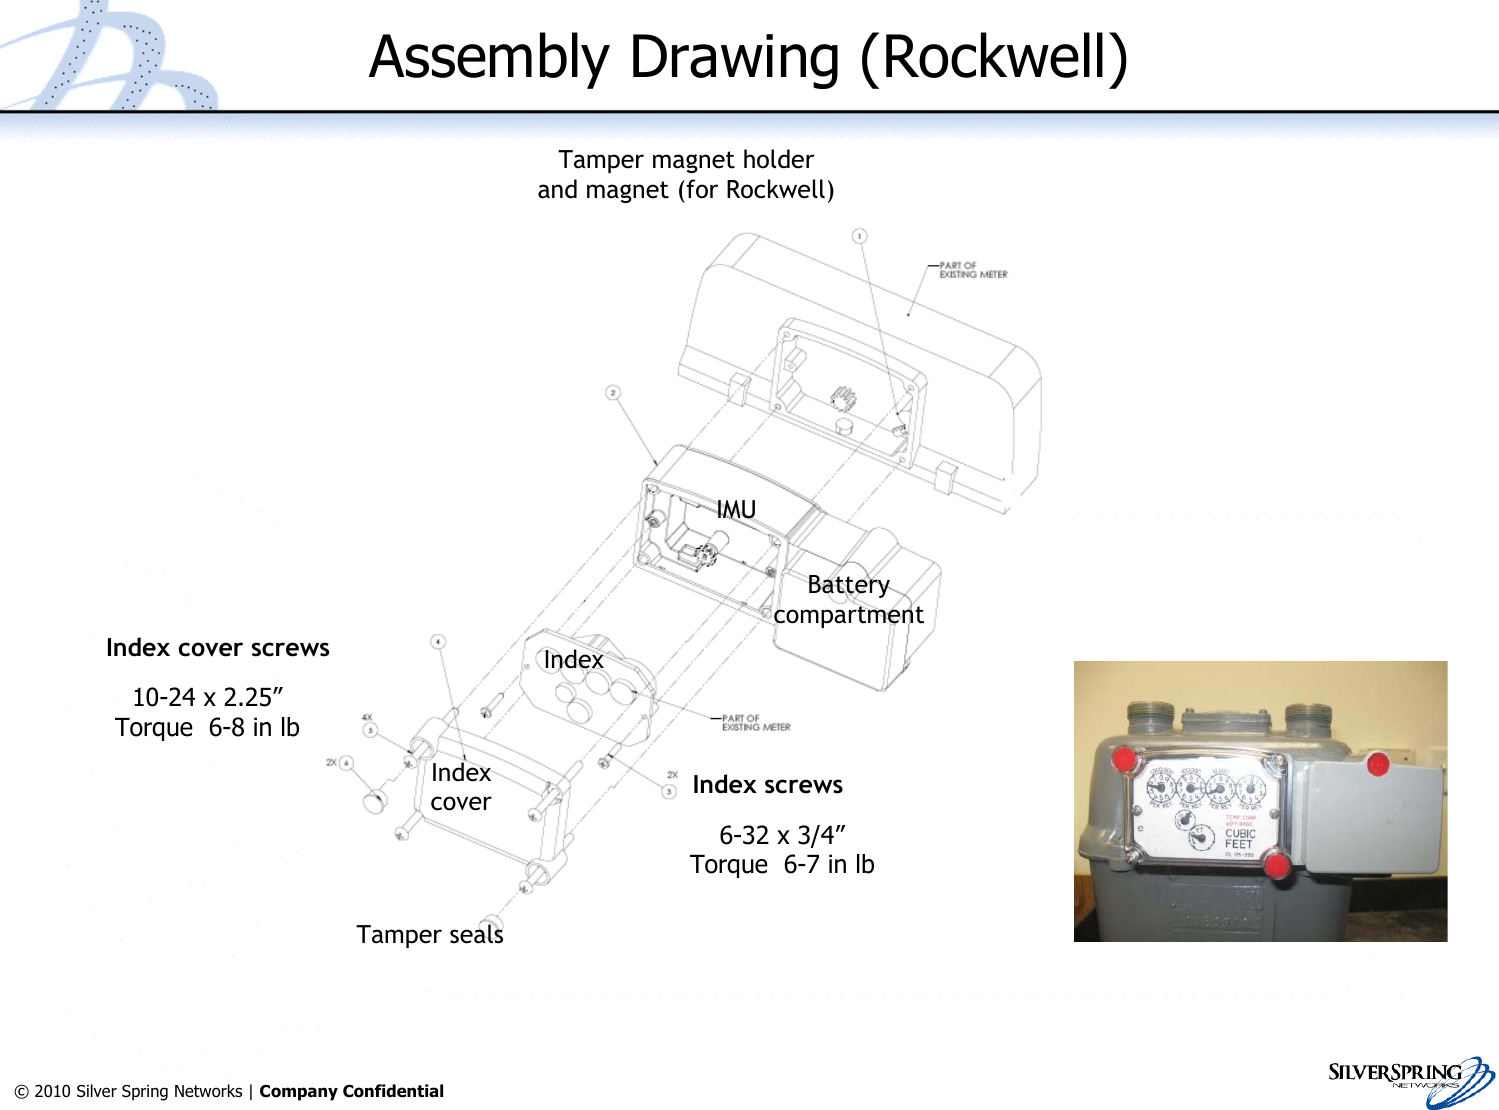 8© 2010 Silver Spring Networks | Company Confidential Assembly Drawing (Rockwell)Indexcover Index screwsIndex cover screwsTamper sealsTamper magnet holderand magnet (for Rockwell)IMUIndexBatterycompartment10-24 x 2.25”Torque  6-8 in lb6-32 x 3/4”Torque  6-7 in lb